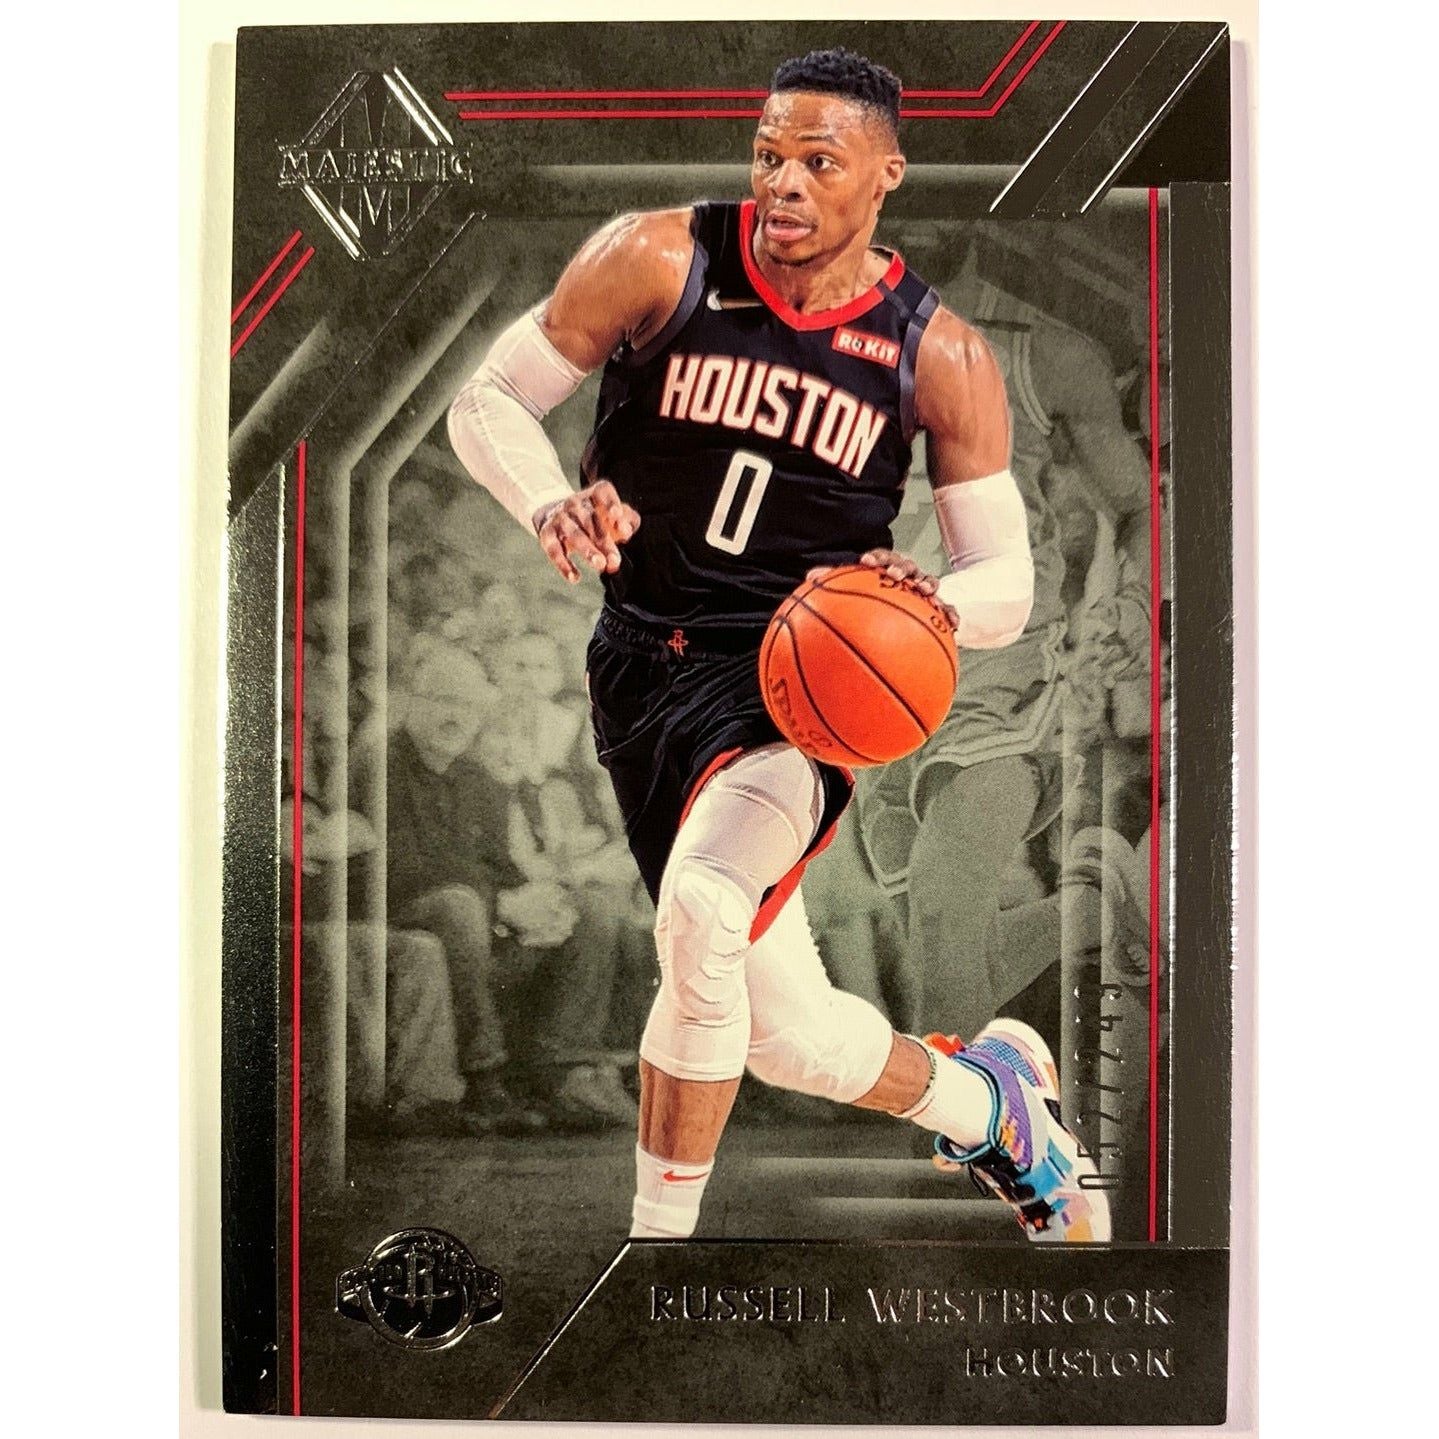  2019-20 Majestic Russell Westbrook /249  Local Legends Cards & Collectibles